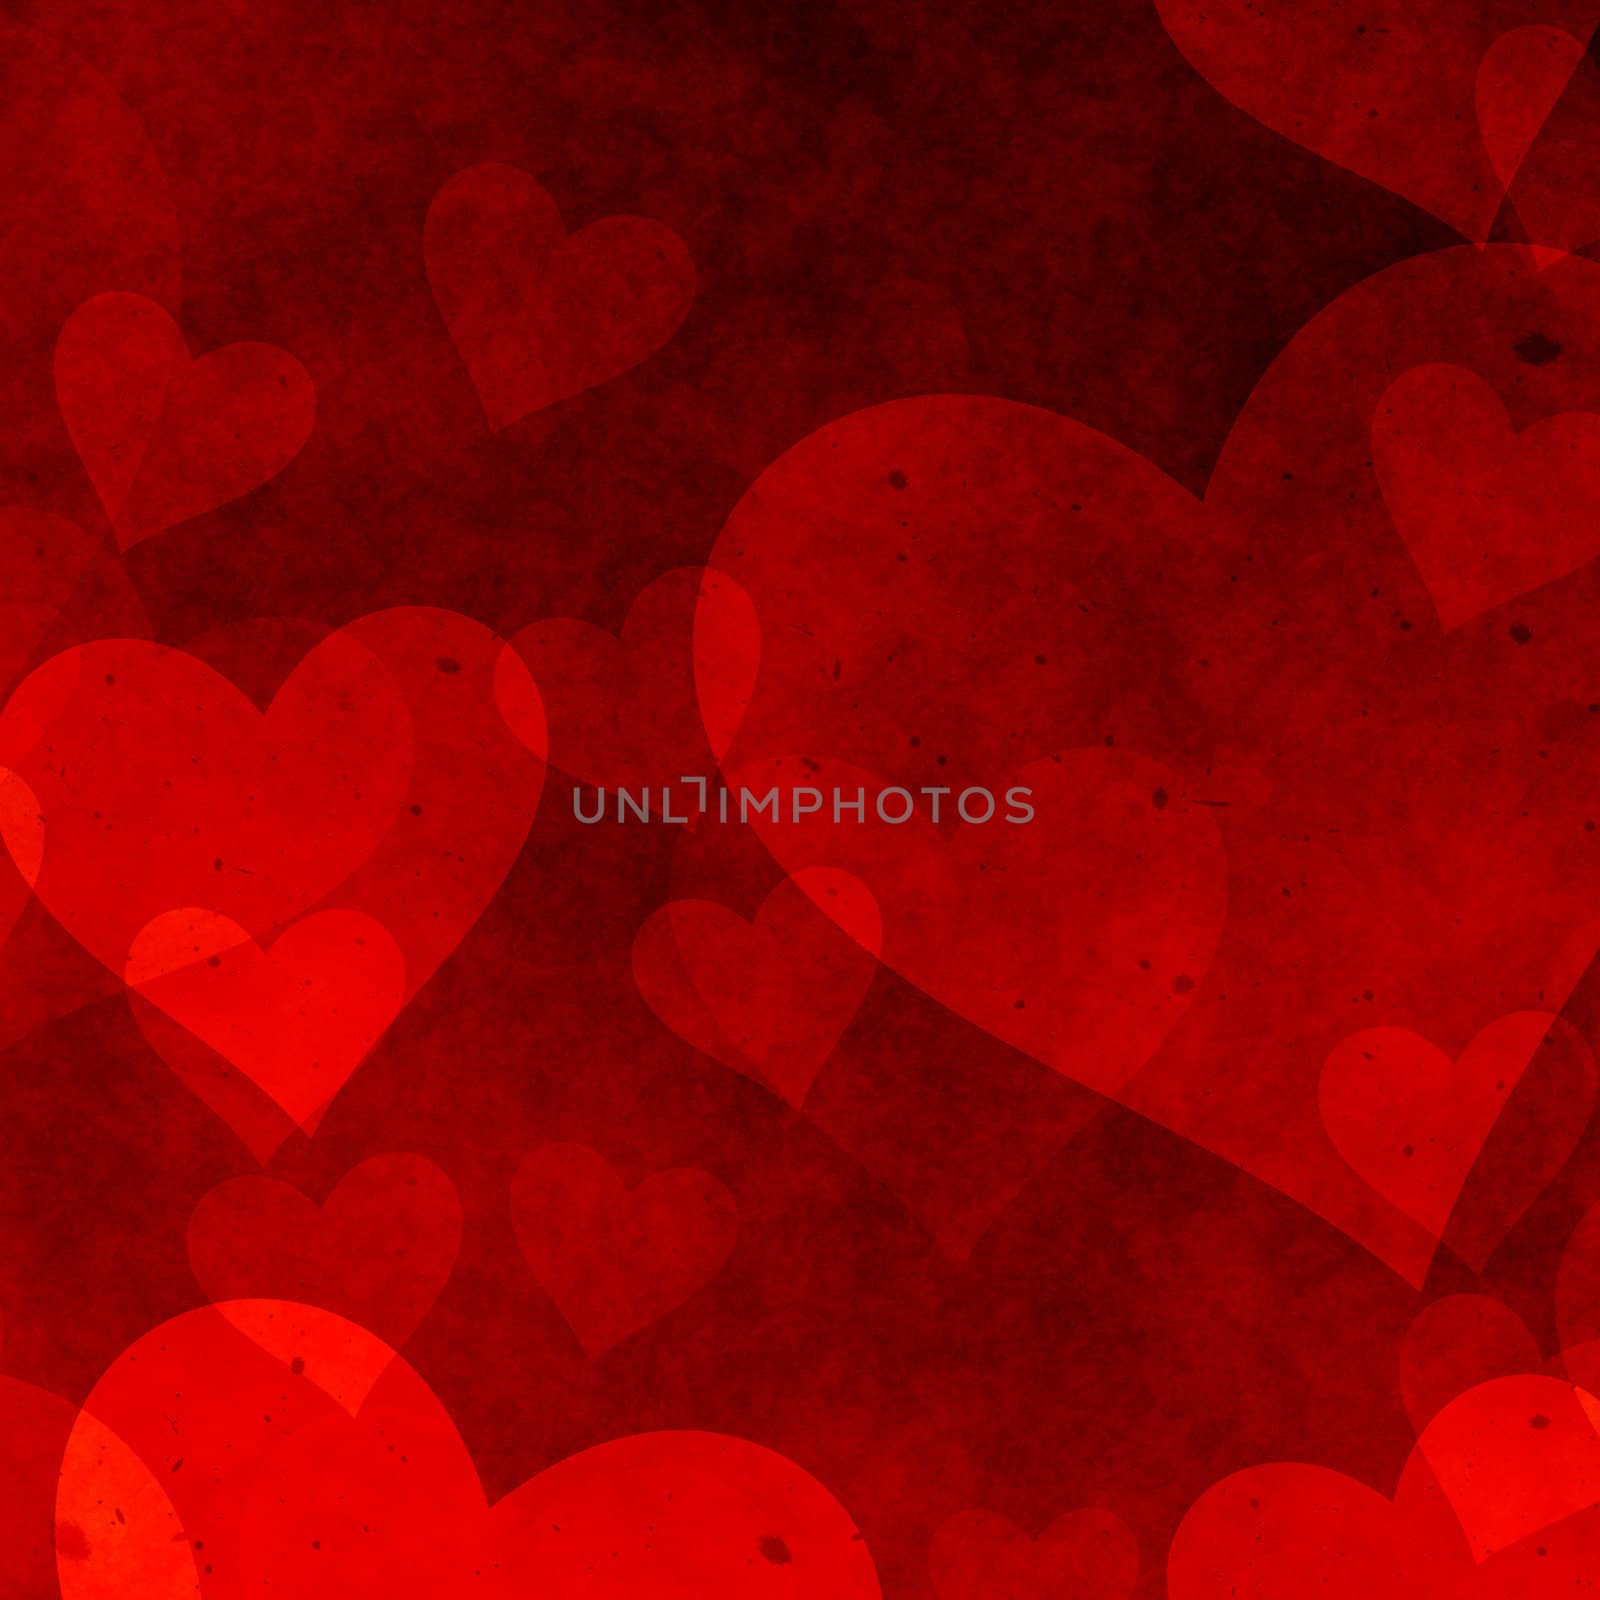 red heart of random sizes in a grunge background